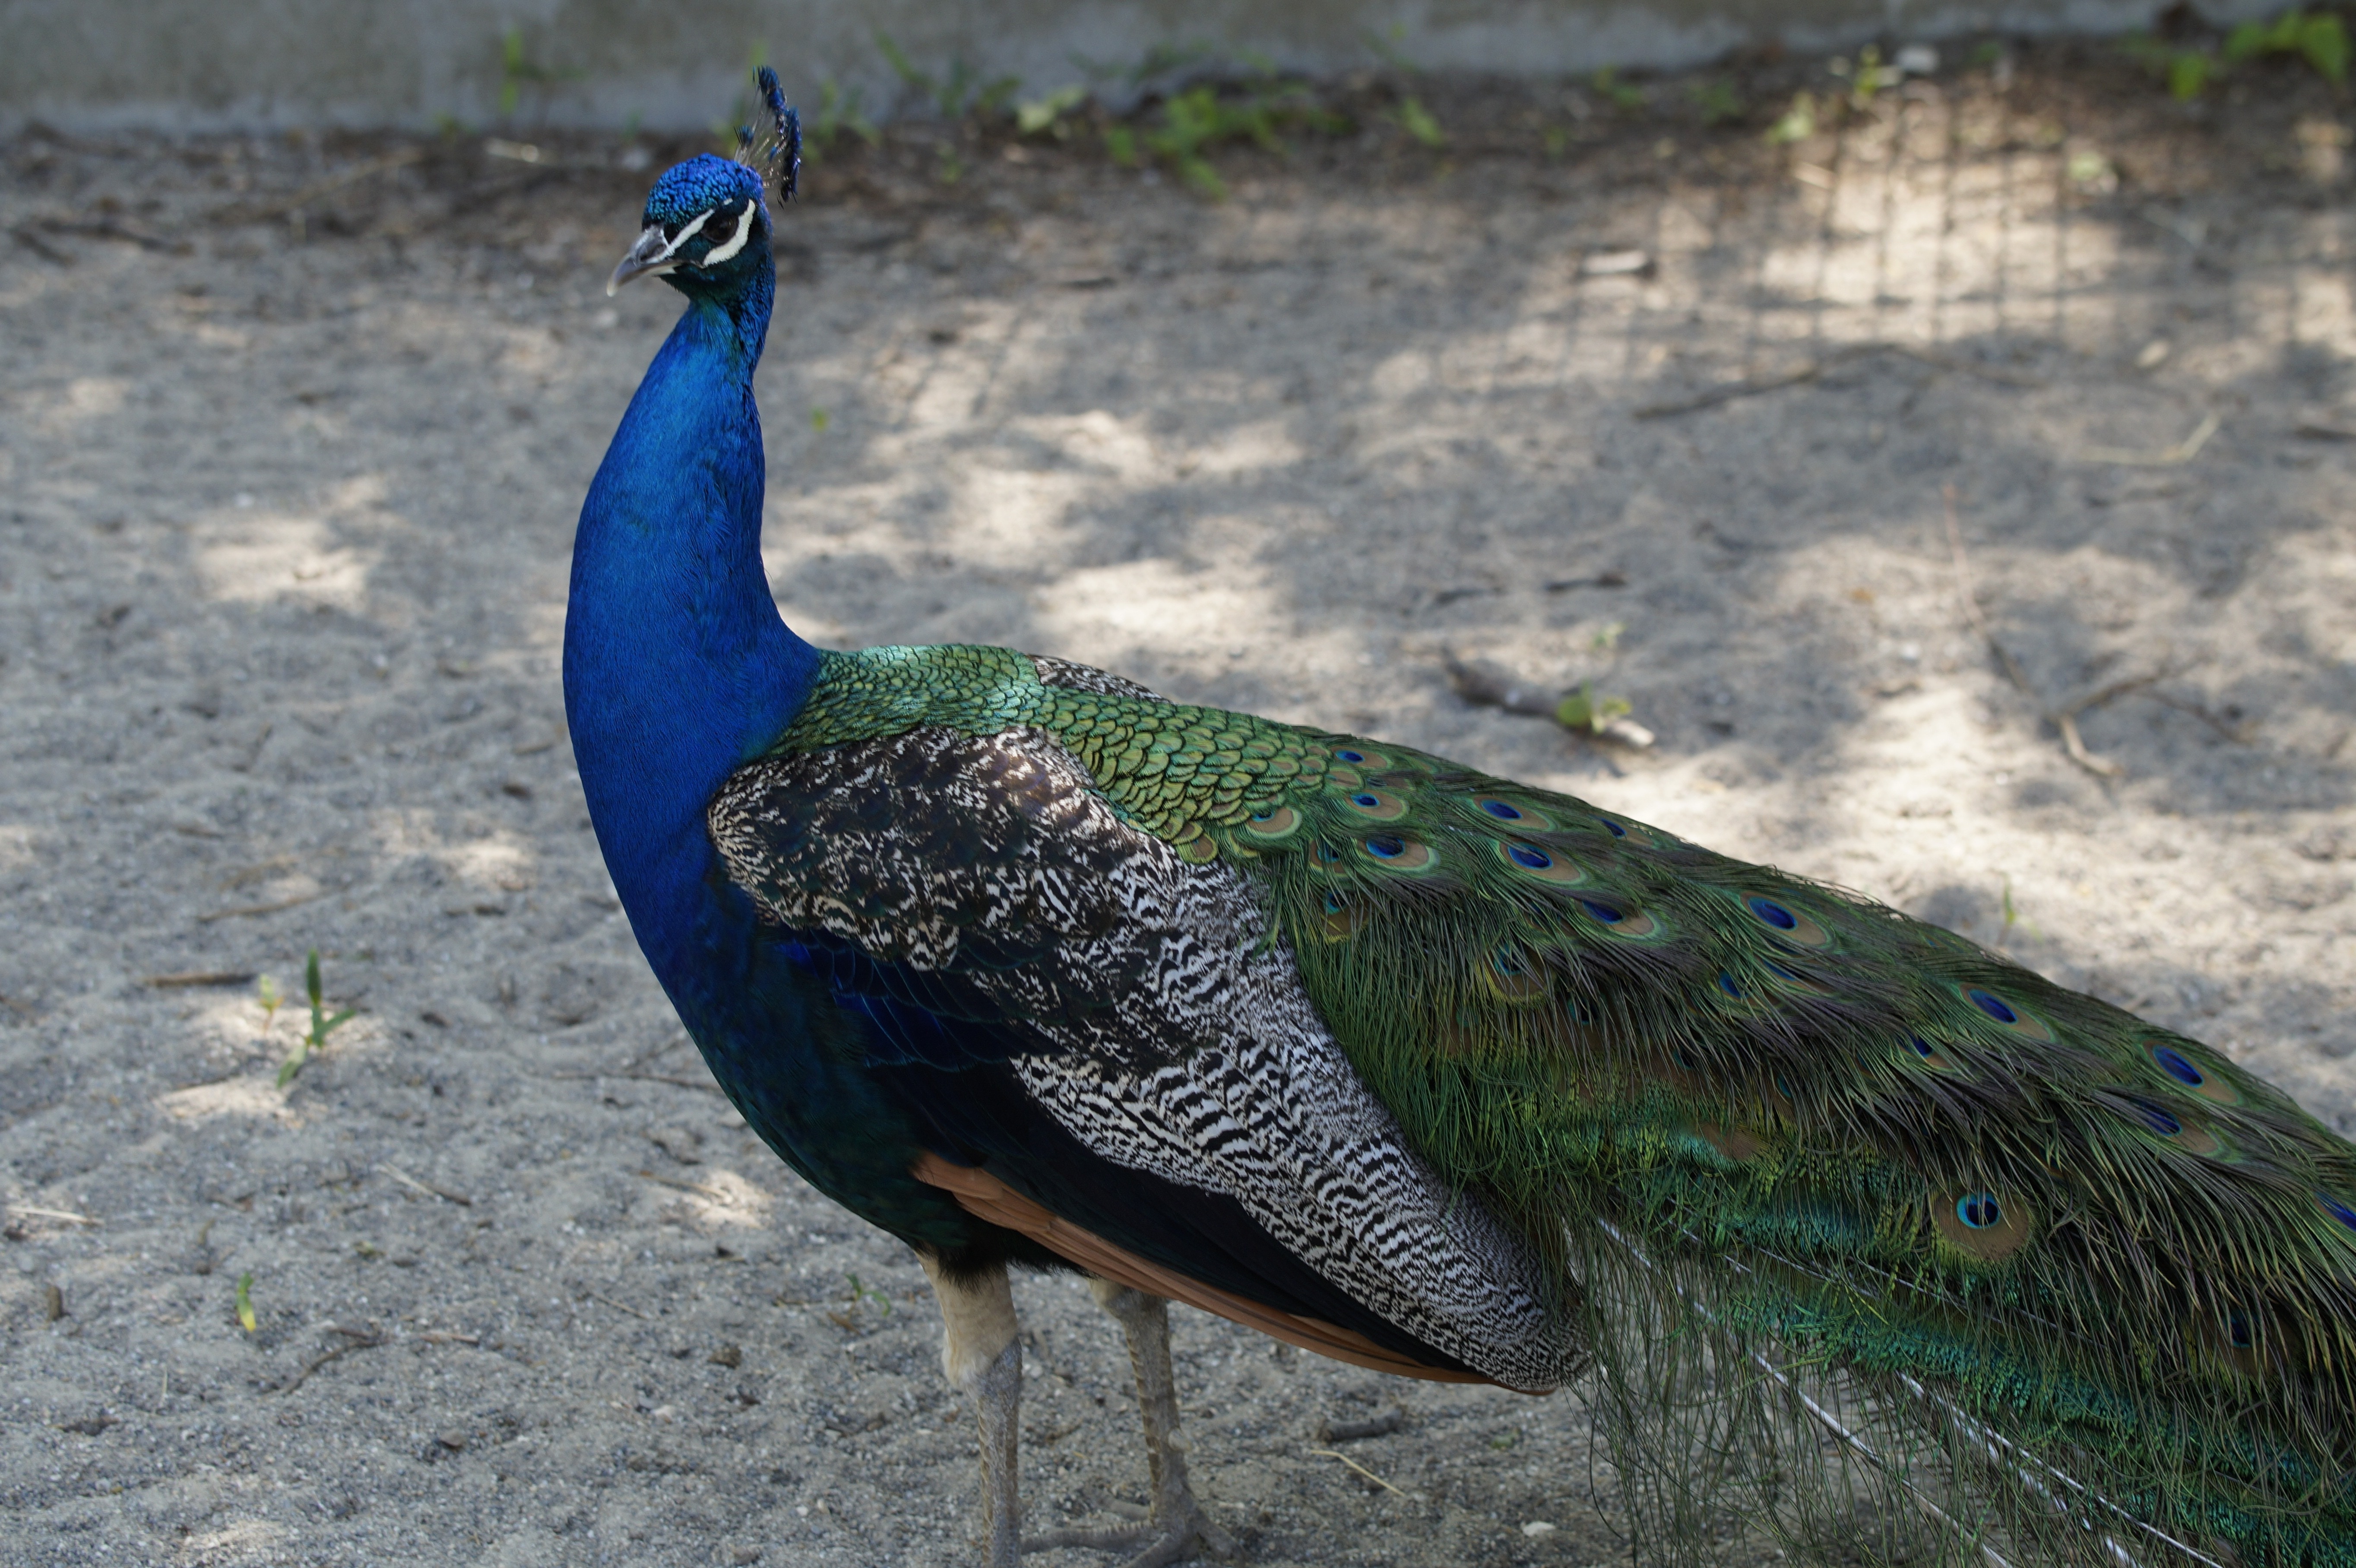 close up photo of peacock